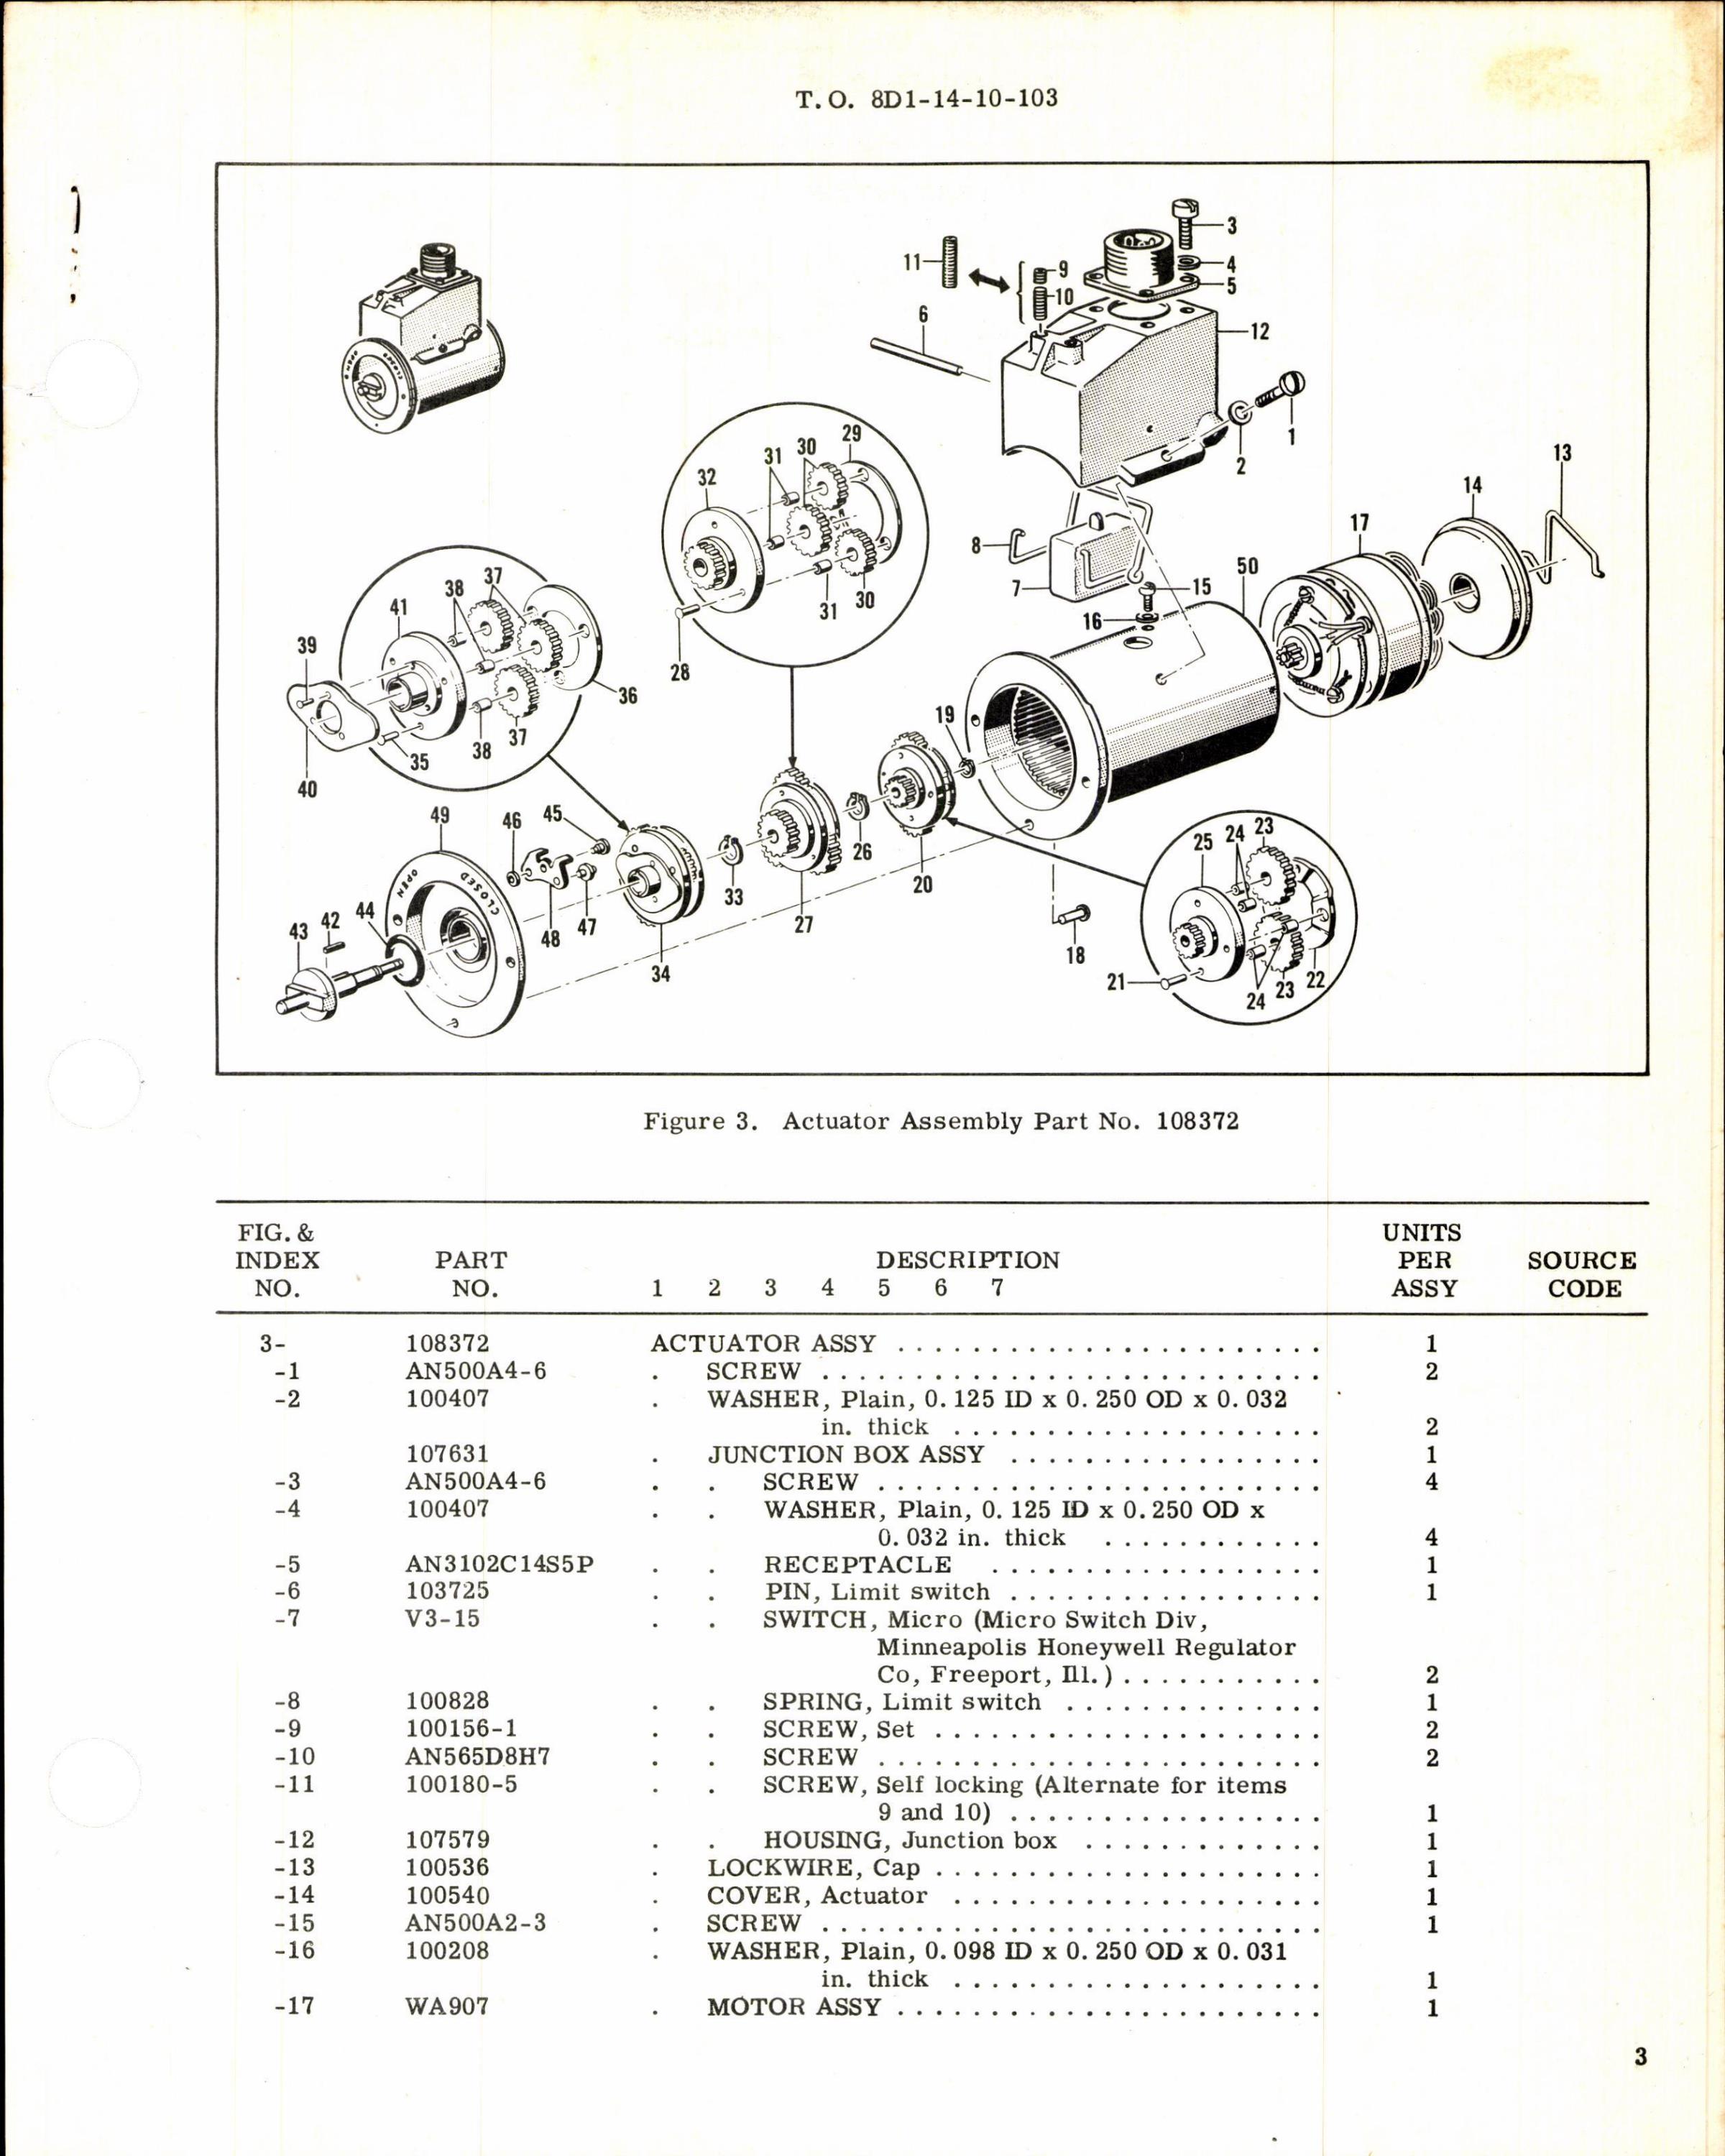 Sample page 3 from AirCorps Library document: Instructions w Parts Breakdown for Actuator Assembly Part 108372